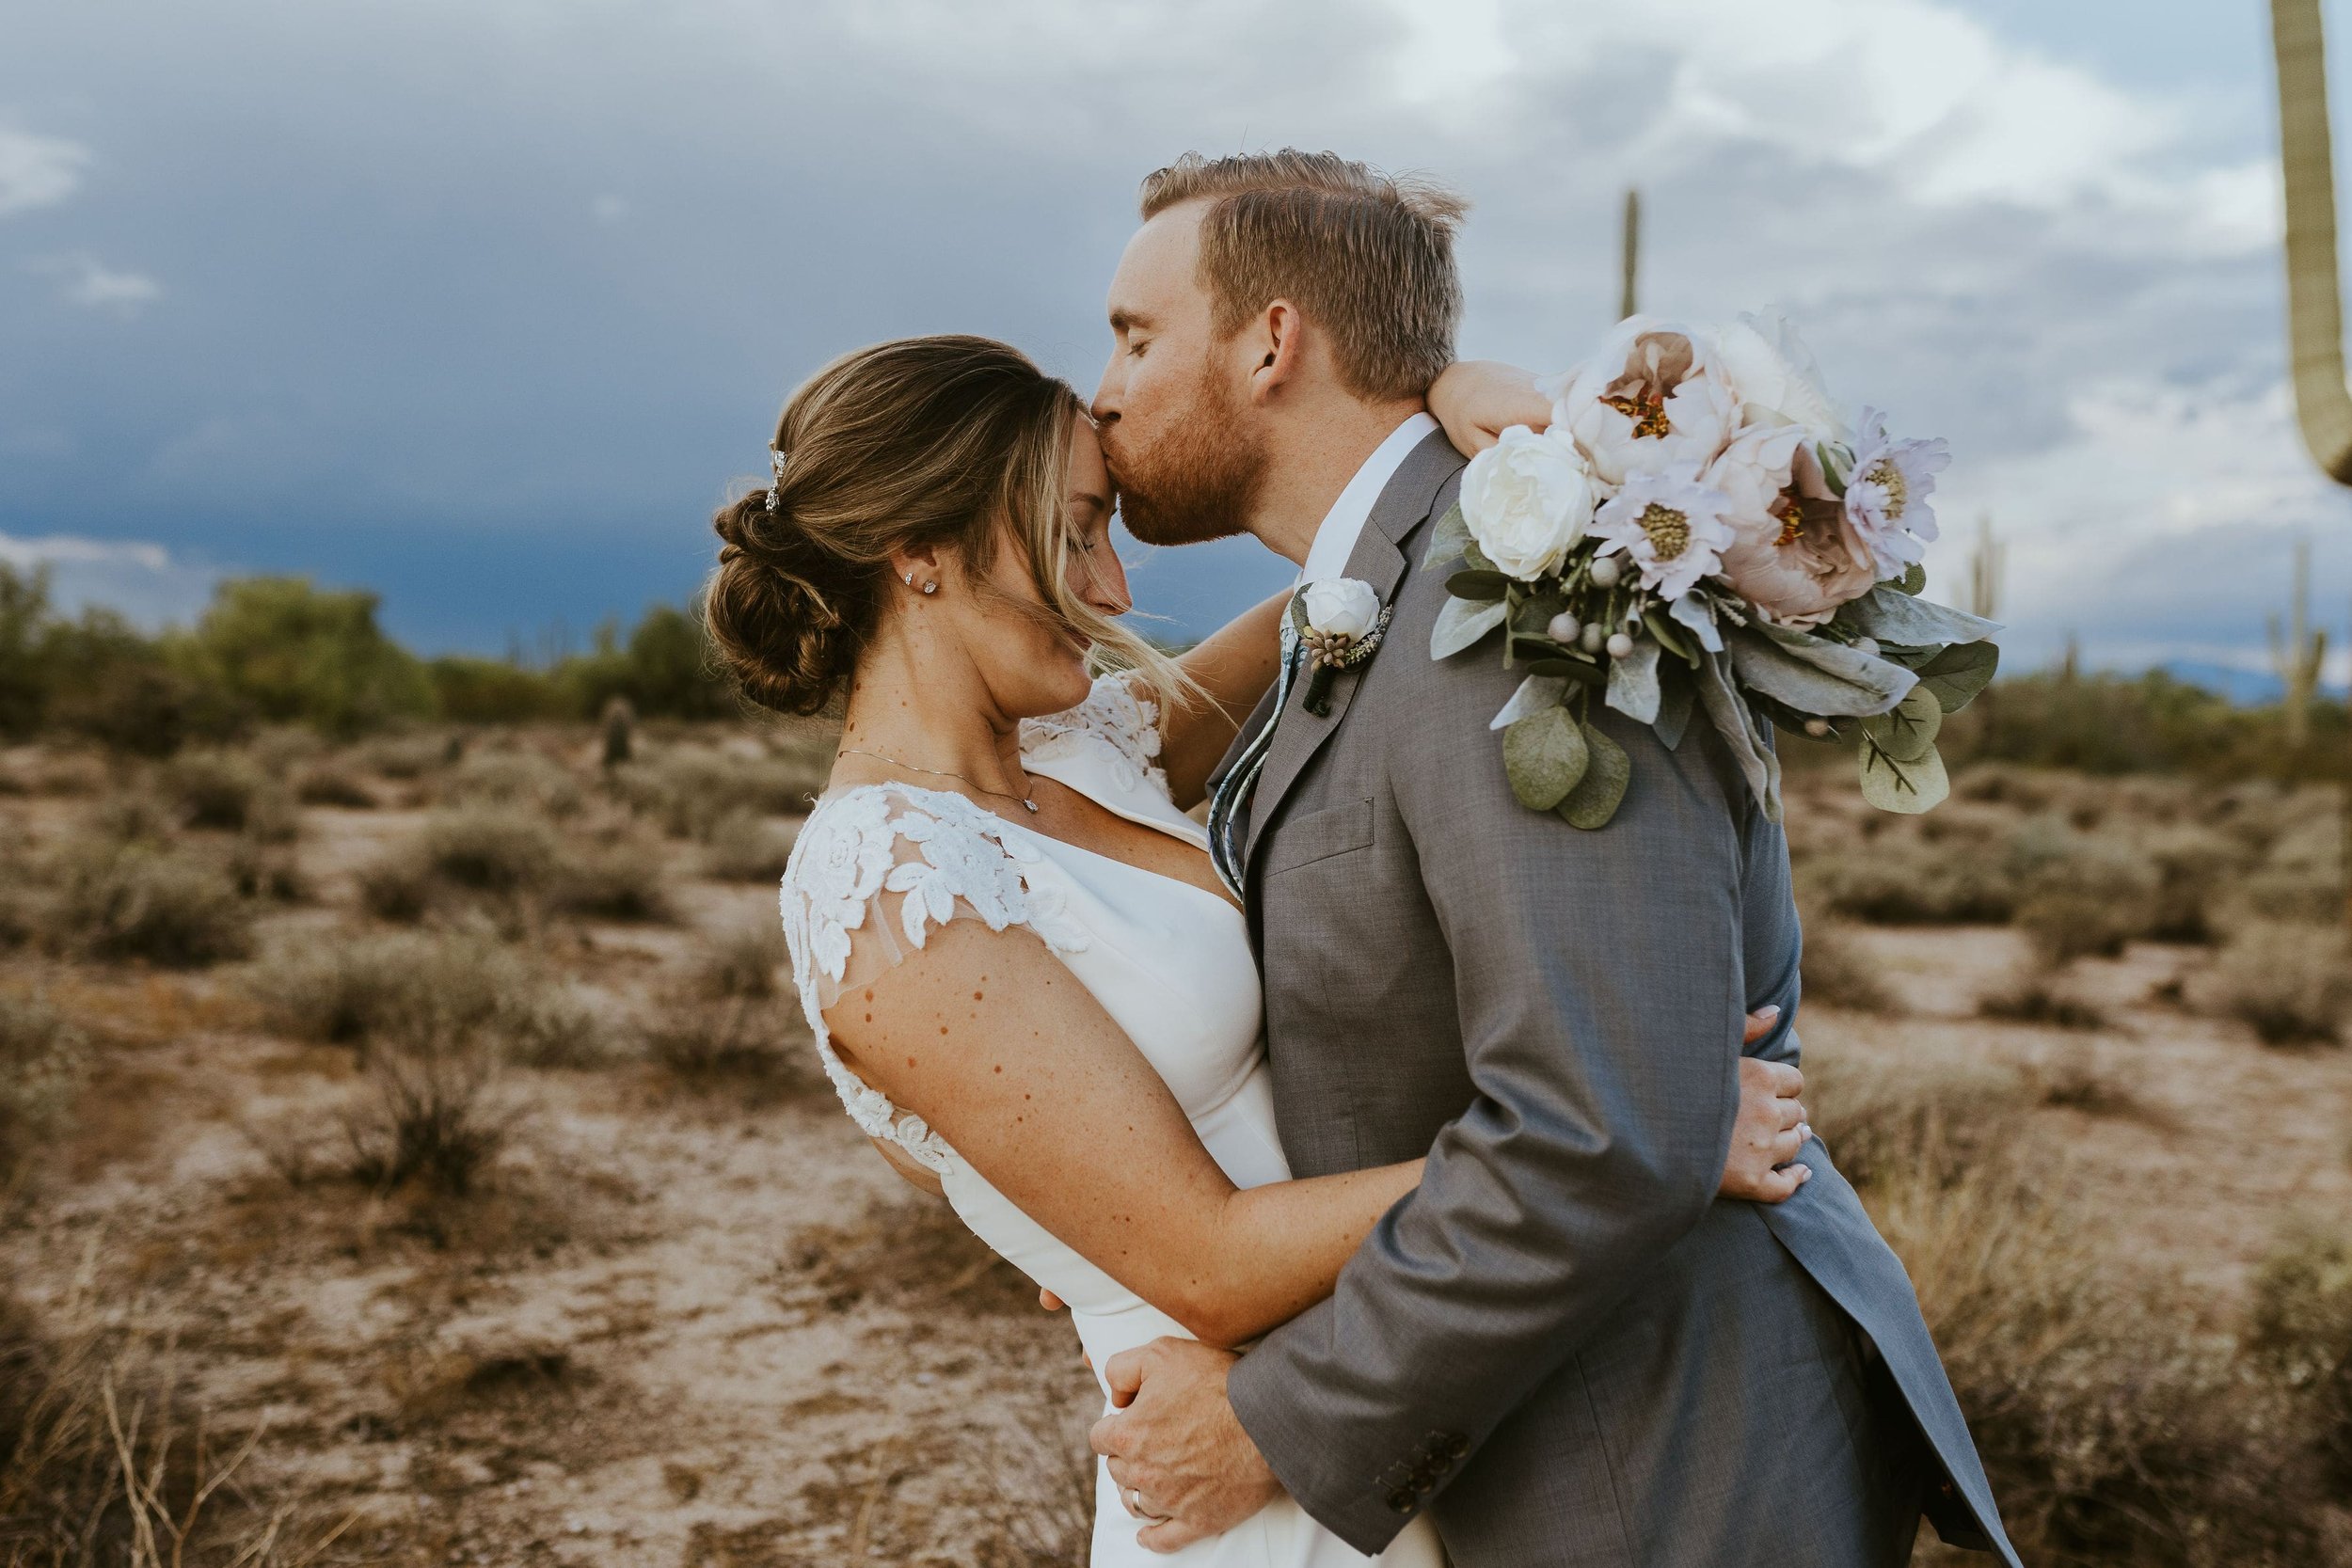 Groom kisses bride on the forehead during desert foothills wedding photos